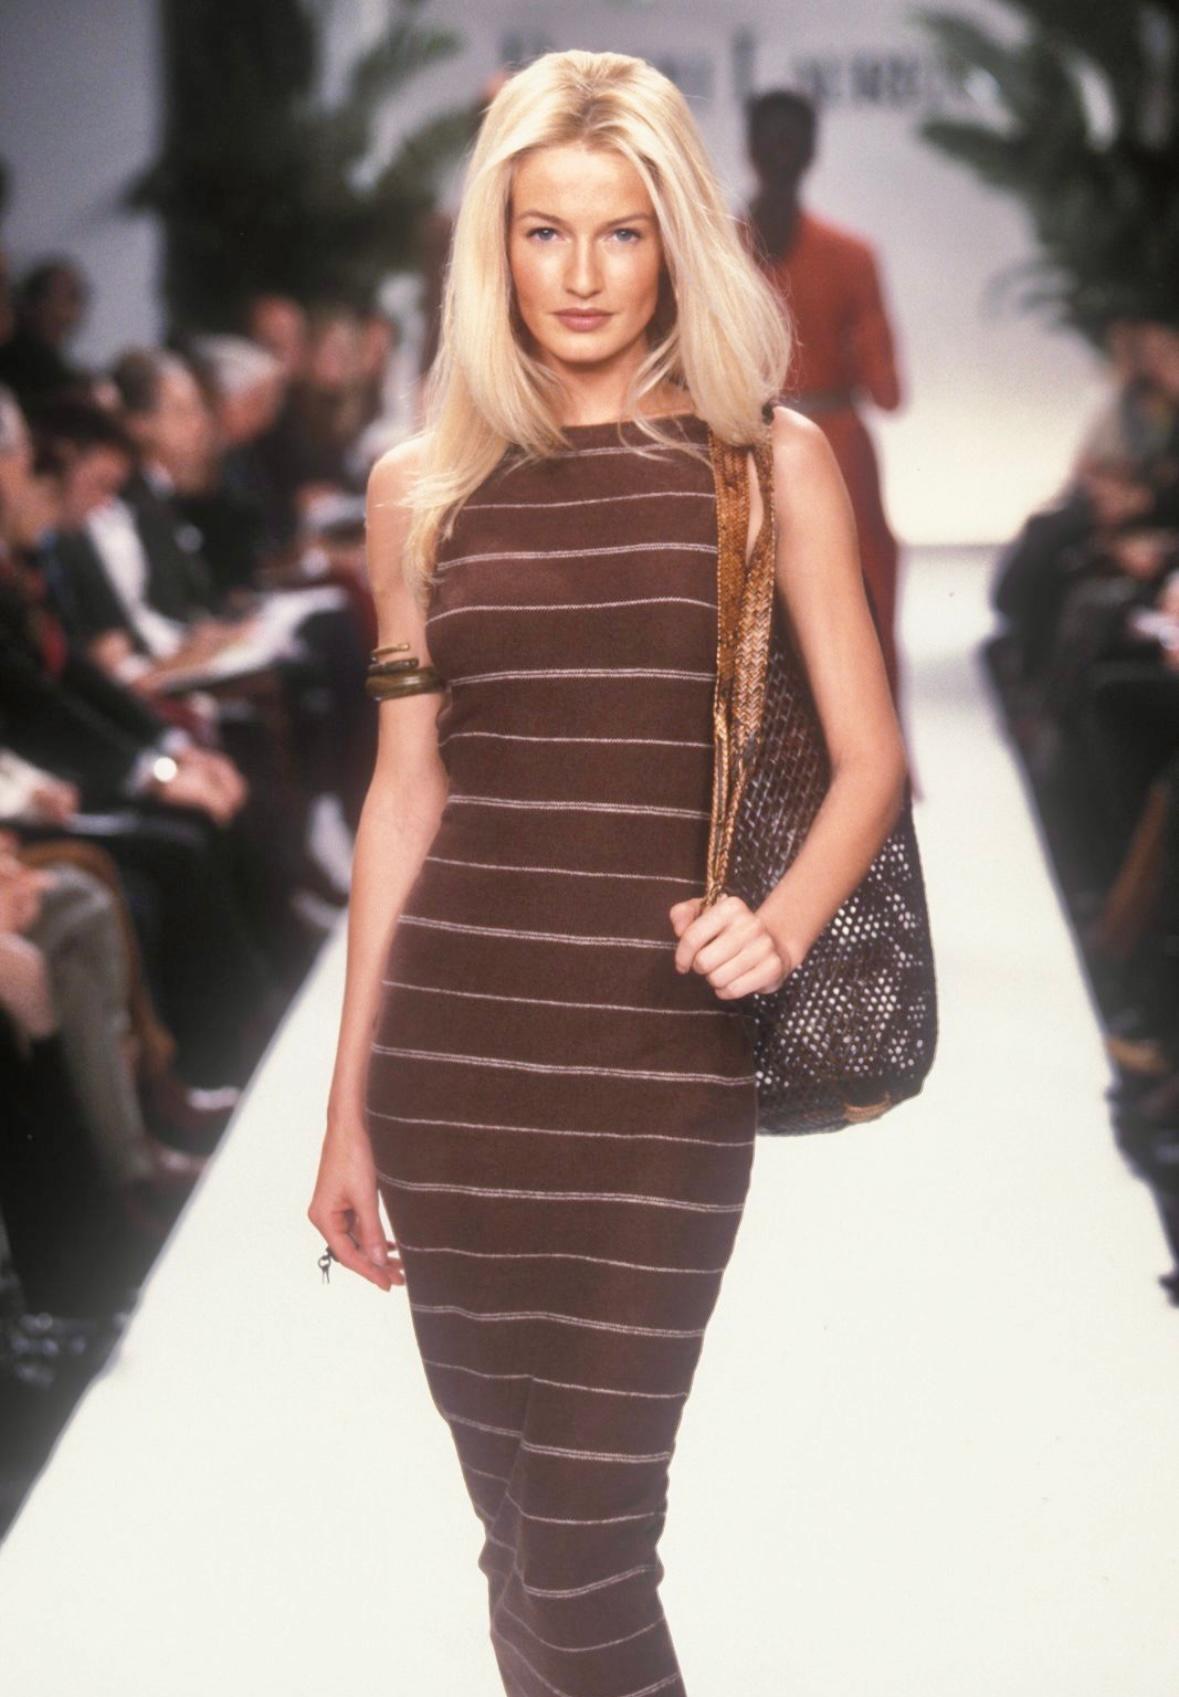 This stunning brown knit Ralph Lauren dress is from the Spring/Summer 1997 collection. This dress made its runway debut, worn by Karen Mulder during the season's presentation. The dress is entirely knit and has thin white stripes throughout. The